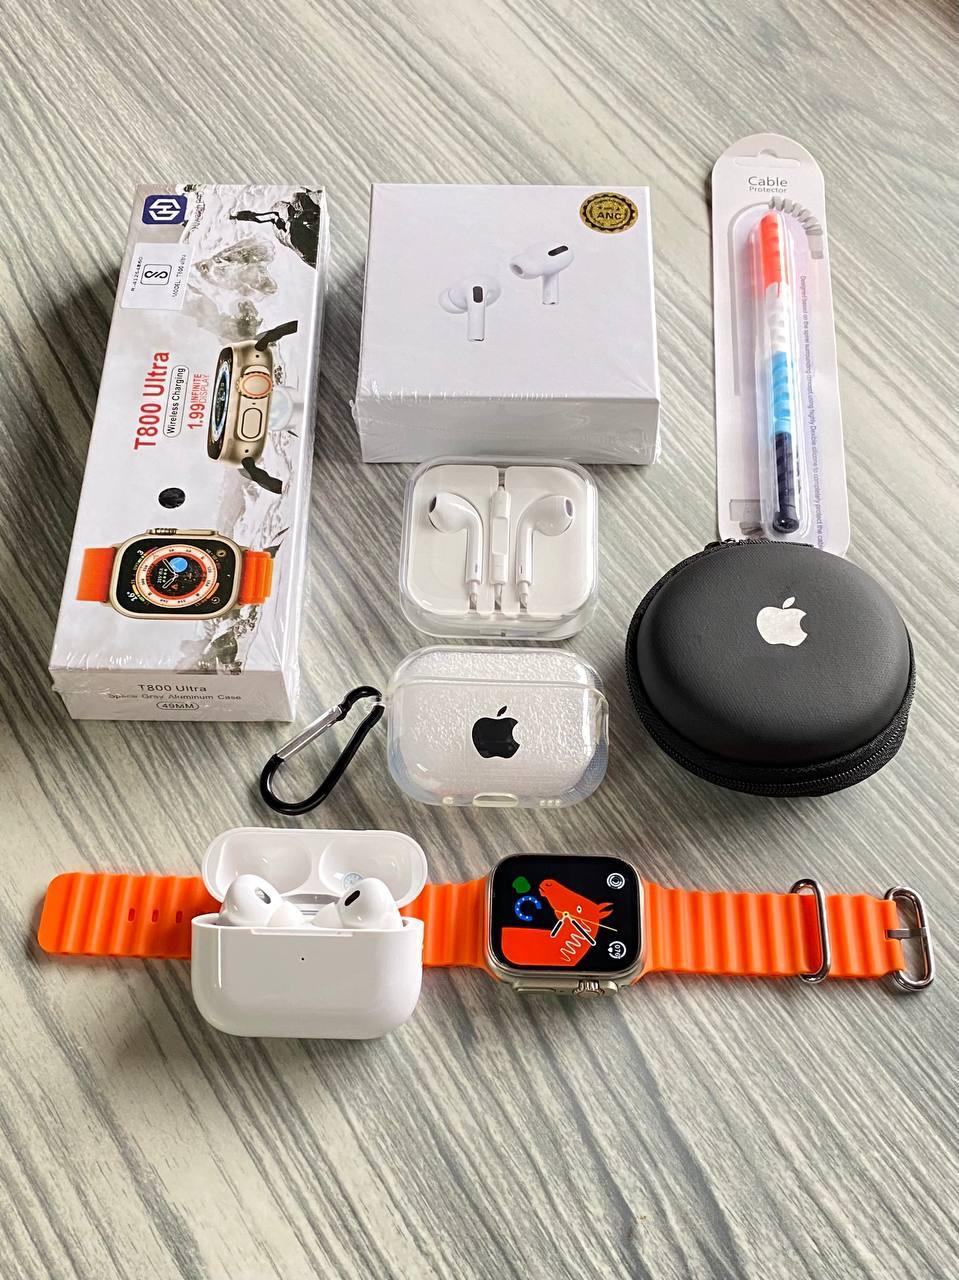 Ultra smartwatch combo with airpods pro 2 case and other Orange